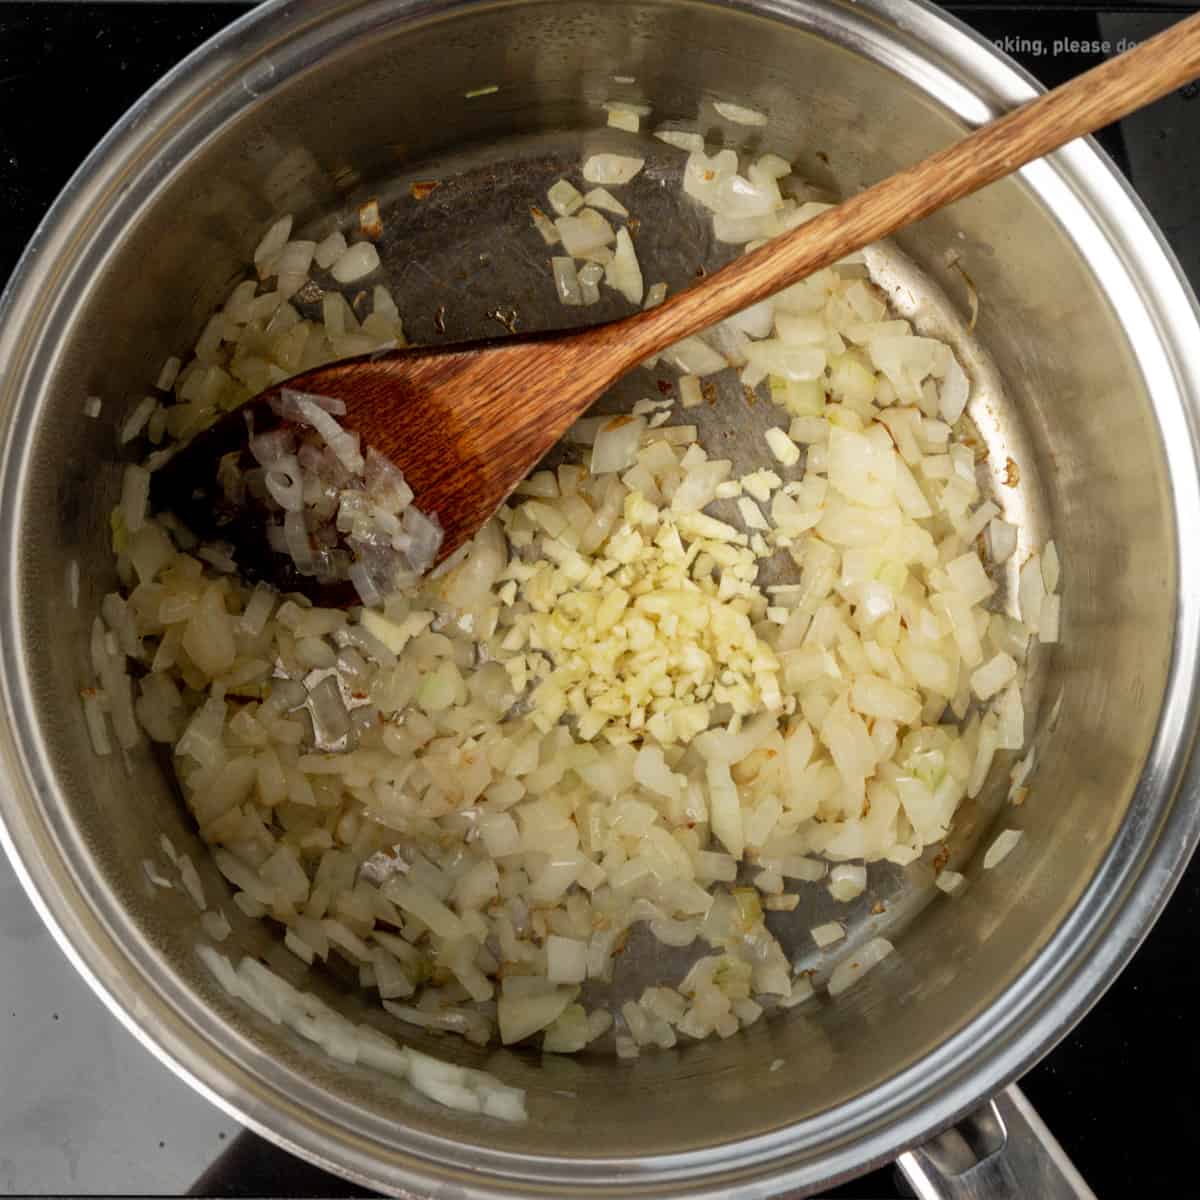 Minced garlic and diced onions in a saucepan.